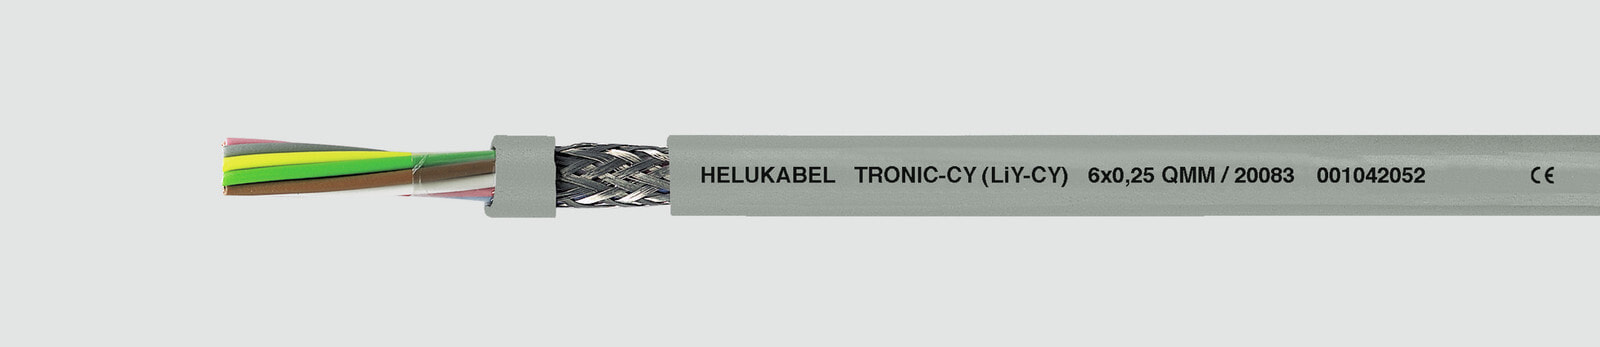 Helukabel TRONIC-CY (LiY-CY) - Low voltage cable - Grey - Polyvinyl chloride (PVC) - Cooper - 1 mm² - 56 kg/km